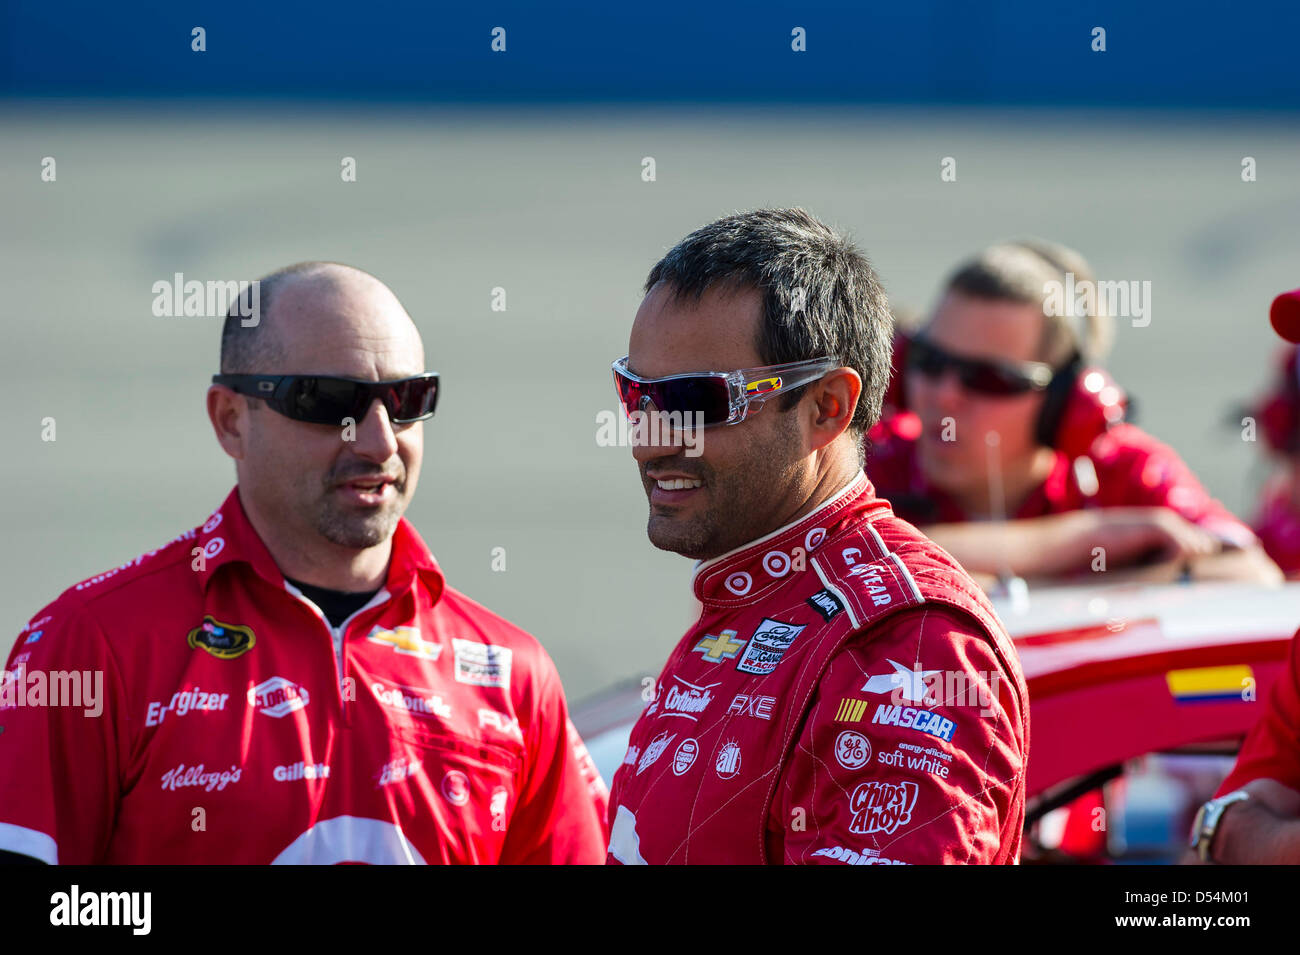 March 22, 2013 - Fontana, CA, U.S. - FONTANA, CA - MAR 22, 2013: Juan Pablo Montoya (42) prepares for a practice session for the Auto Club 400 at Auto Club Speedway in FONTANA, CA. Stock Photo